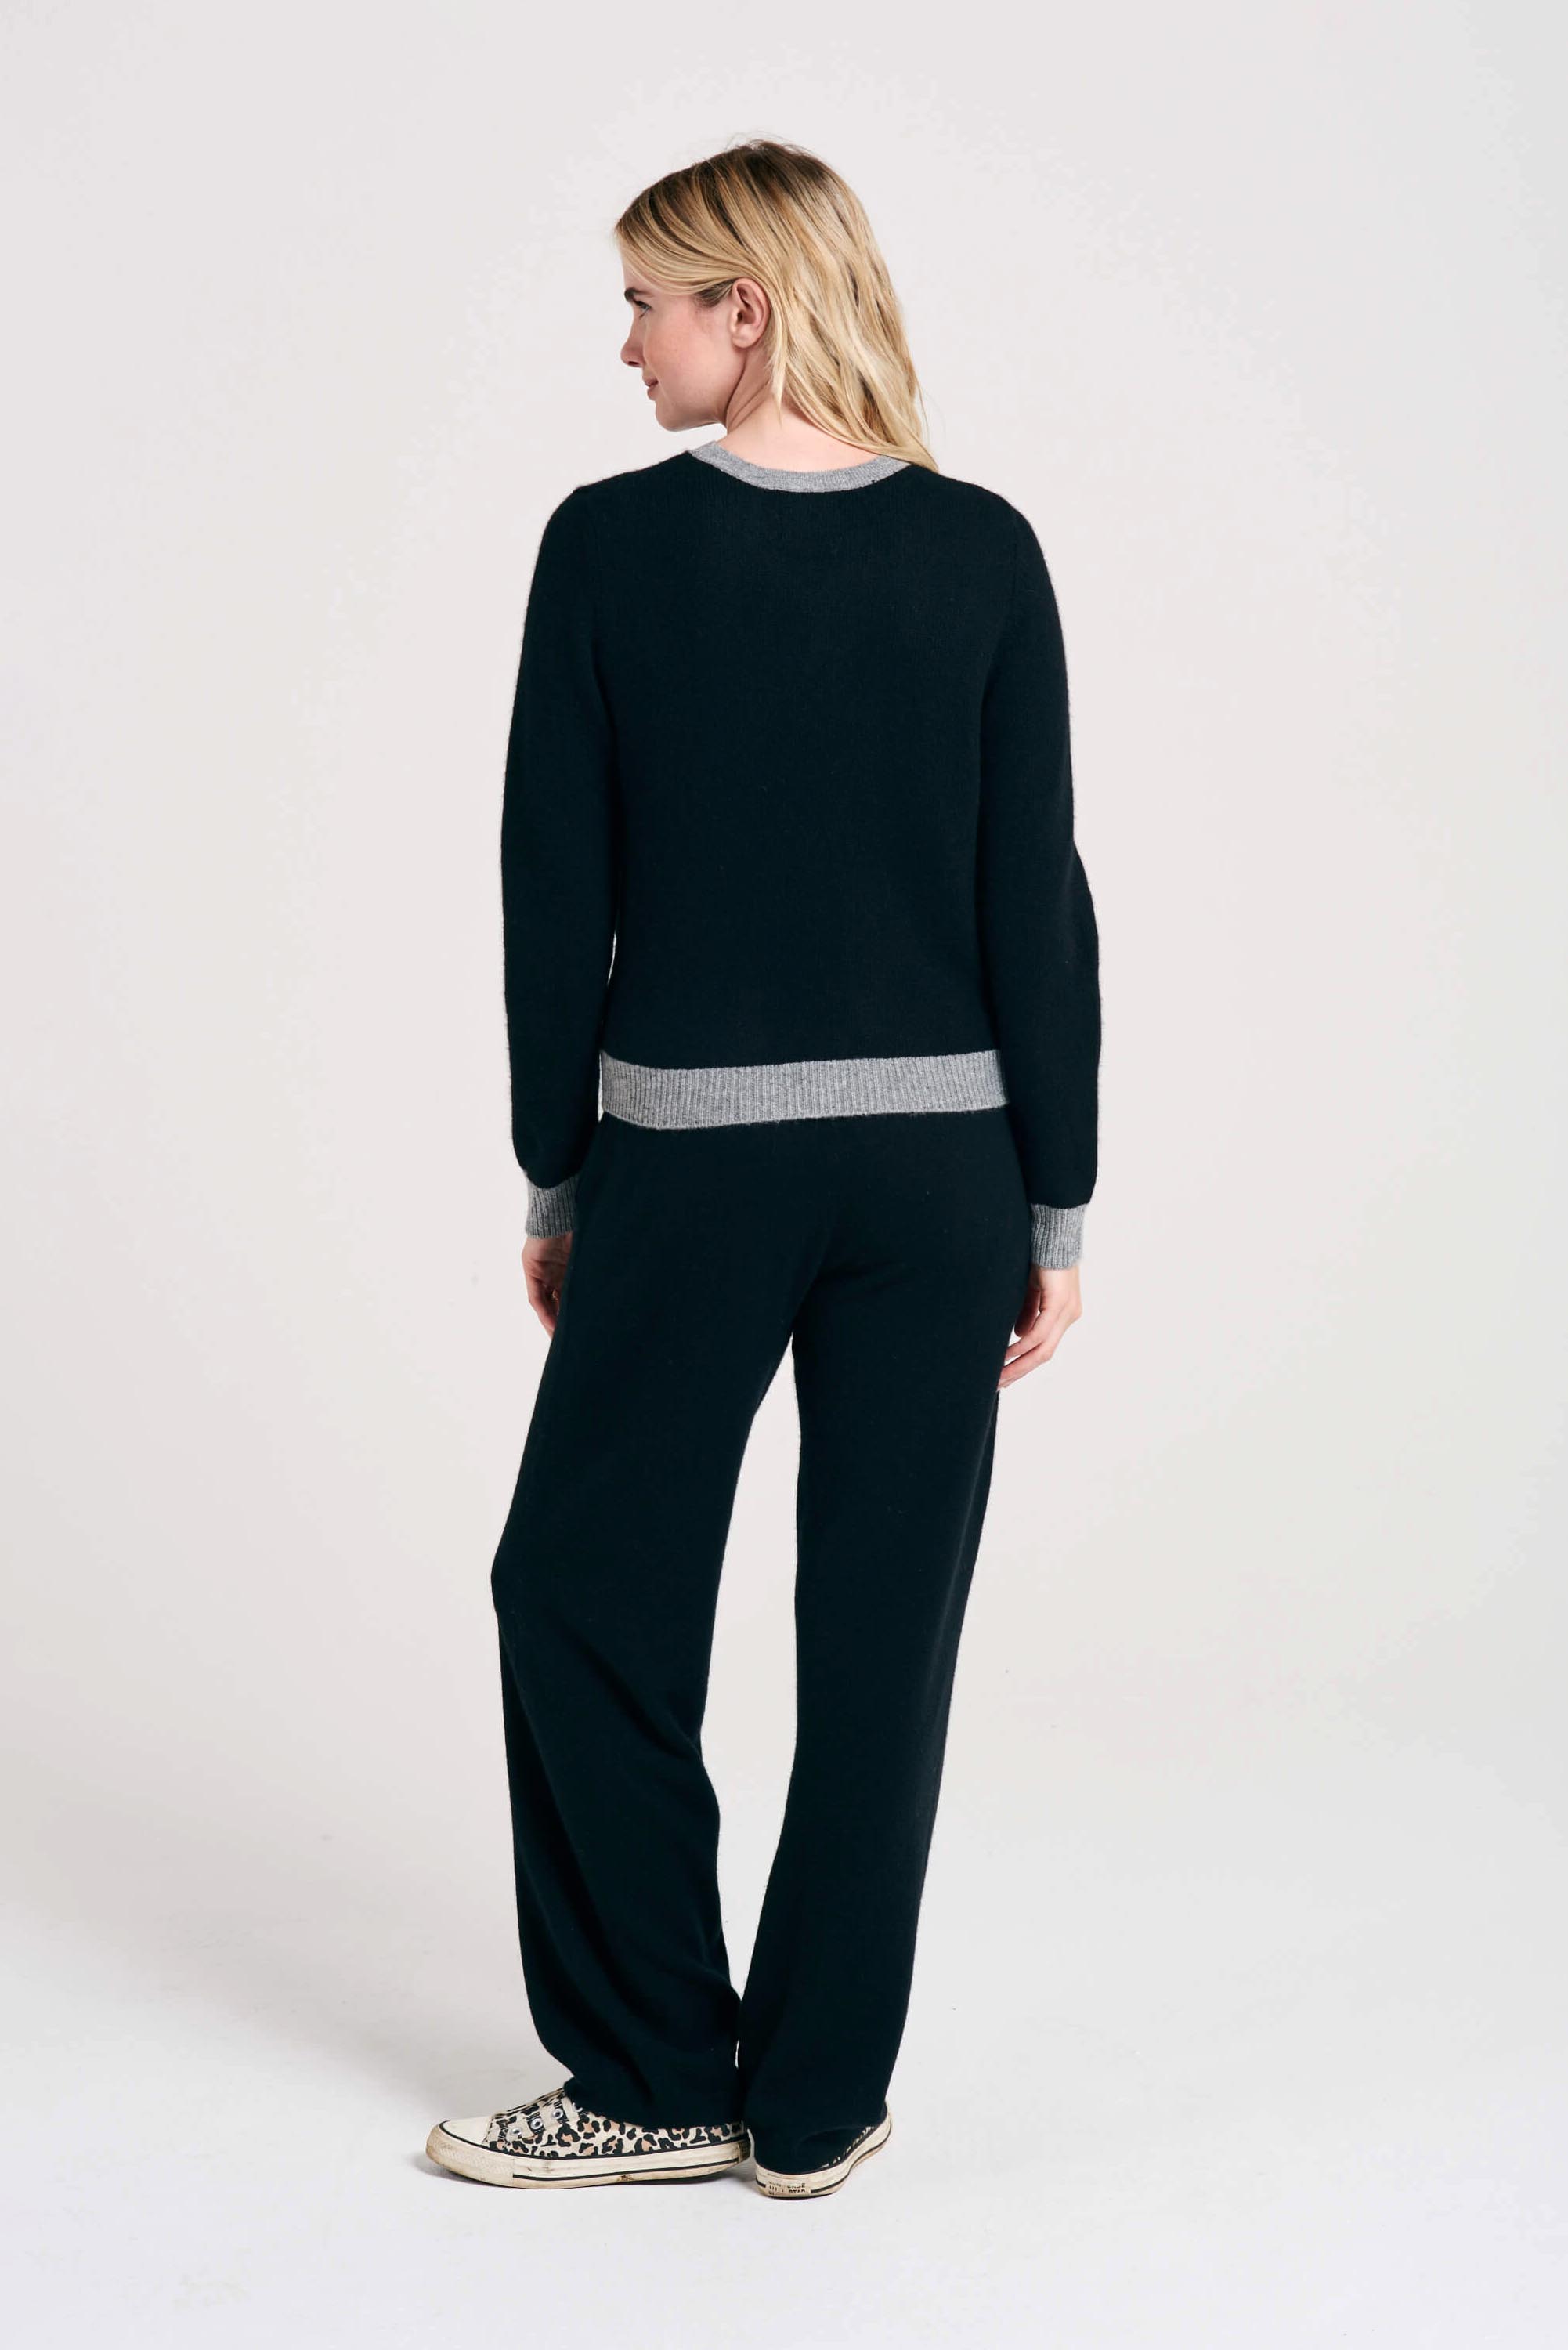 Blonde female model wearing Jumper1234 black cashmere crew neck with mid grey ribs facing away from the camera